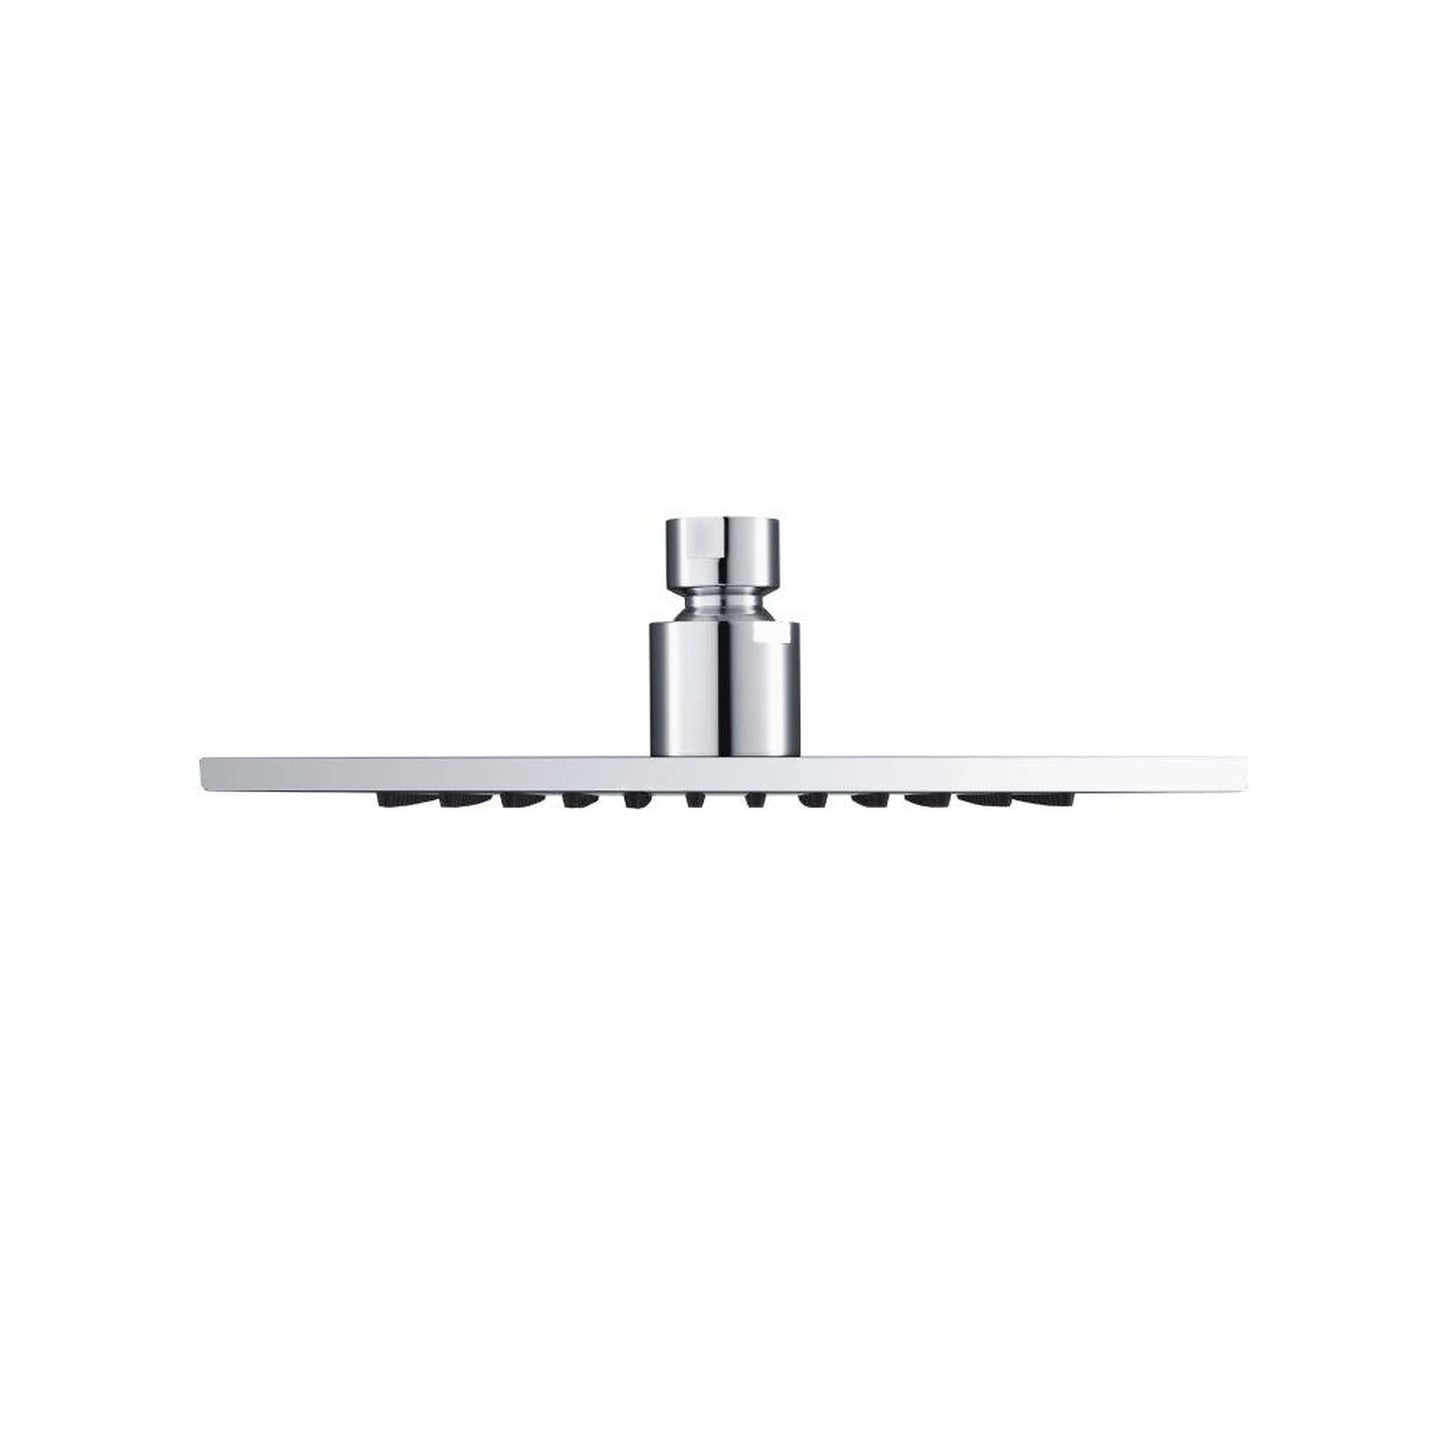 Isenberg Serie 160 Single Output Chrome Wall-Mounted Shower Set With Single Function Square Rain Shower Head, Two-Handle Shower Trim and 1-Output Wall-Mounted Thermostatic Shower Valve With Integrated Volume Control